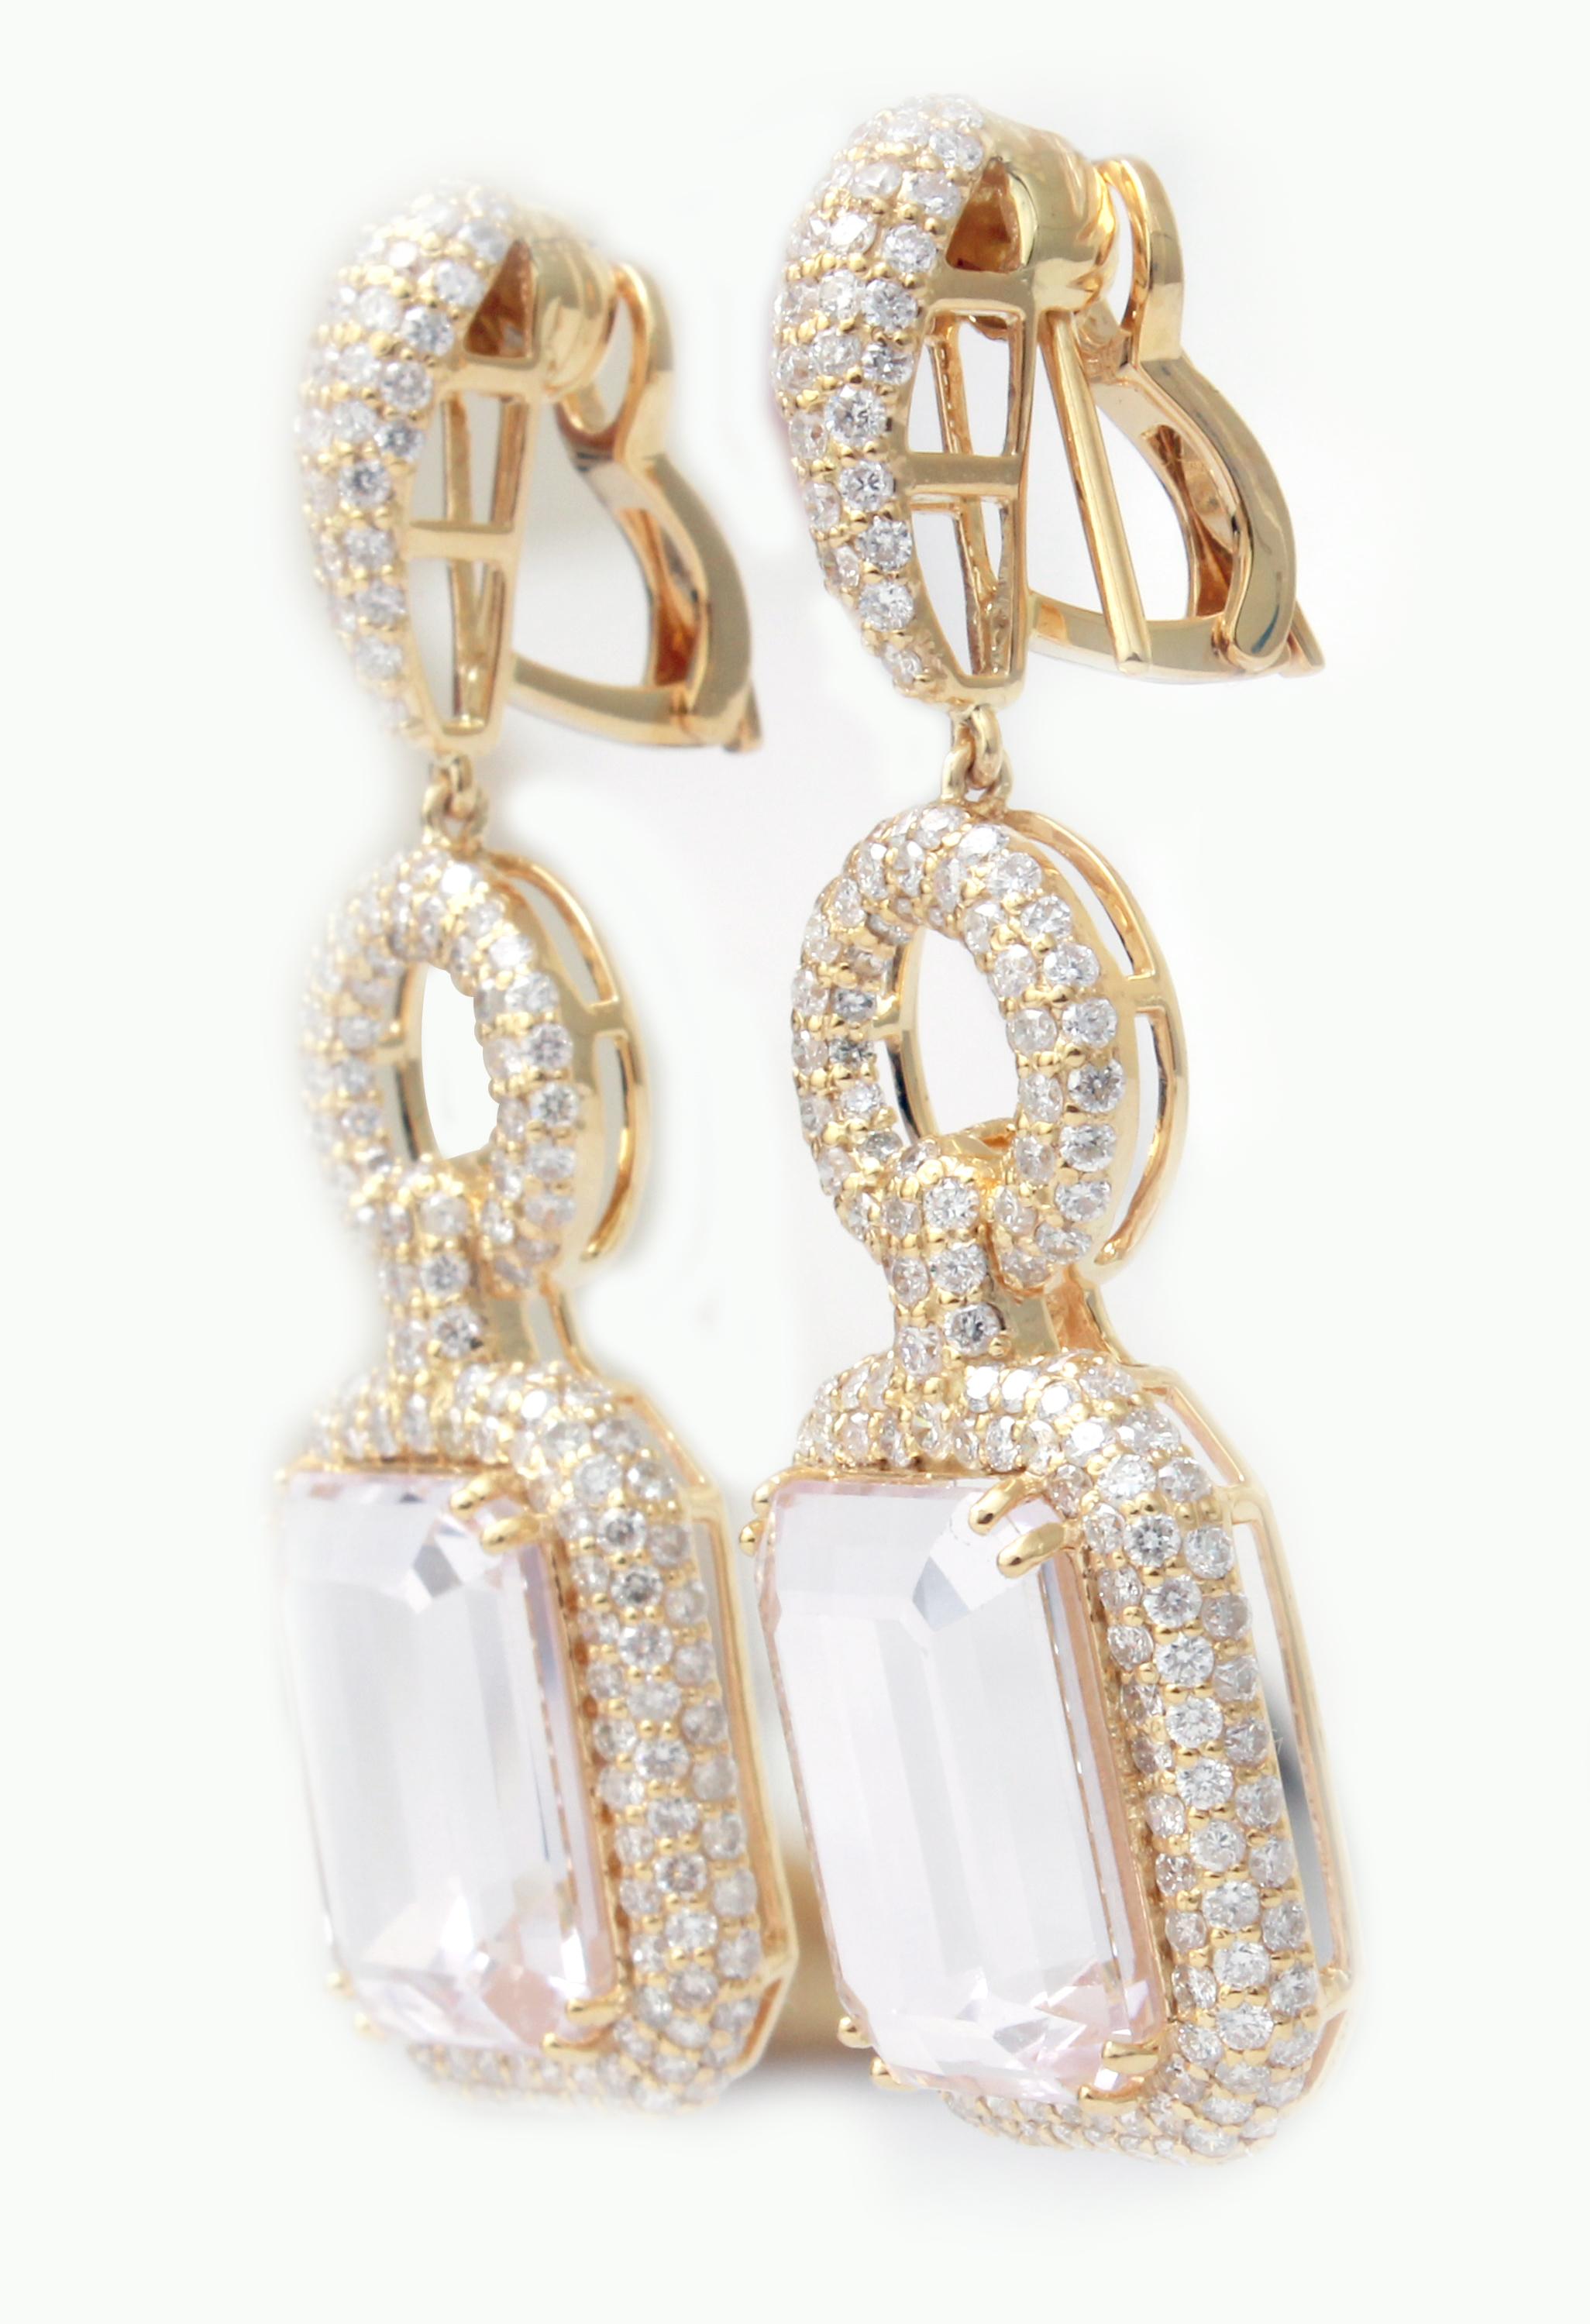 Gorgeous Pair of Earrings mounted with a pair of Kunzites weighing 30.47 carats, with 440 pieces of Round Cut White Diamonds weighing approx. 5.07 carats. The Earrings are made in 18K Yellow Gold and weighs approximately 14.650 grams.
